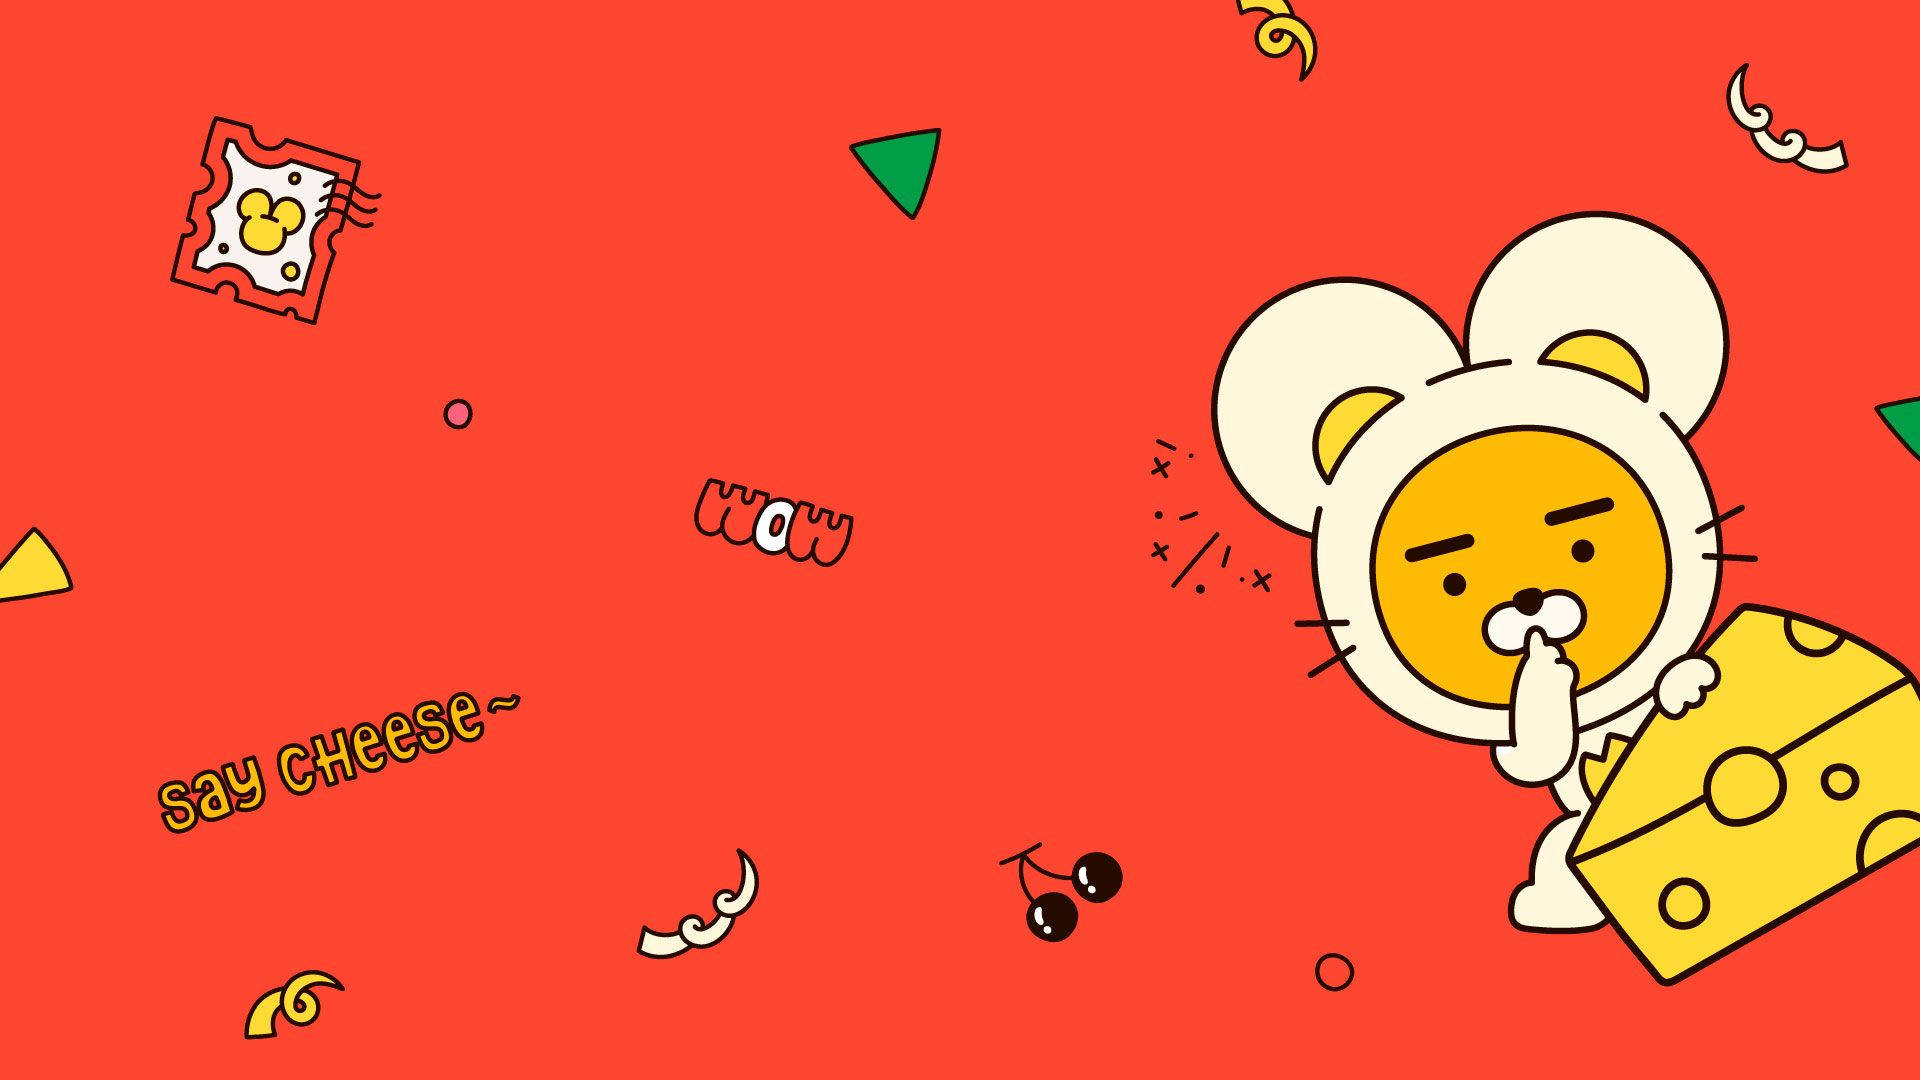 Ryan As Mouse Kakao Friends Background